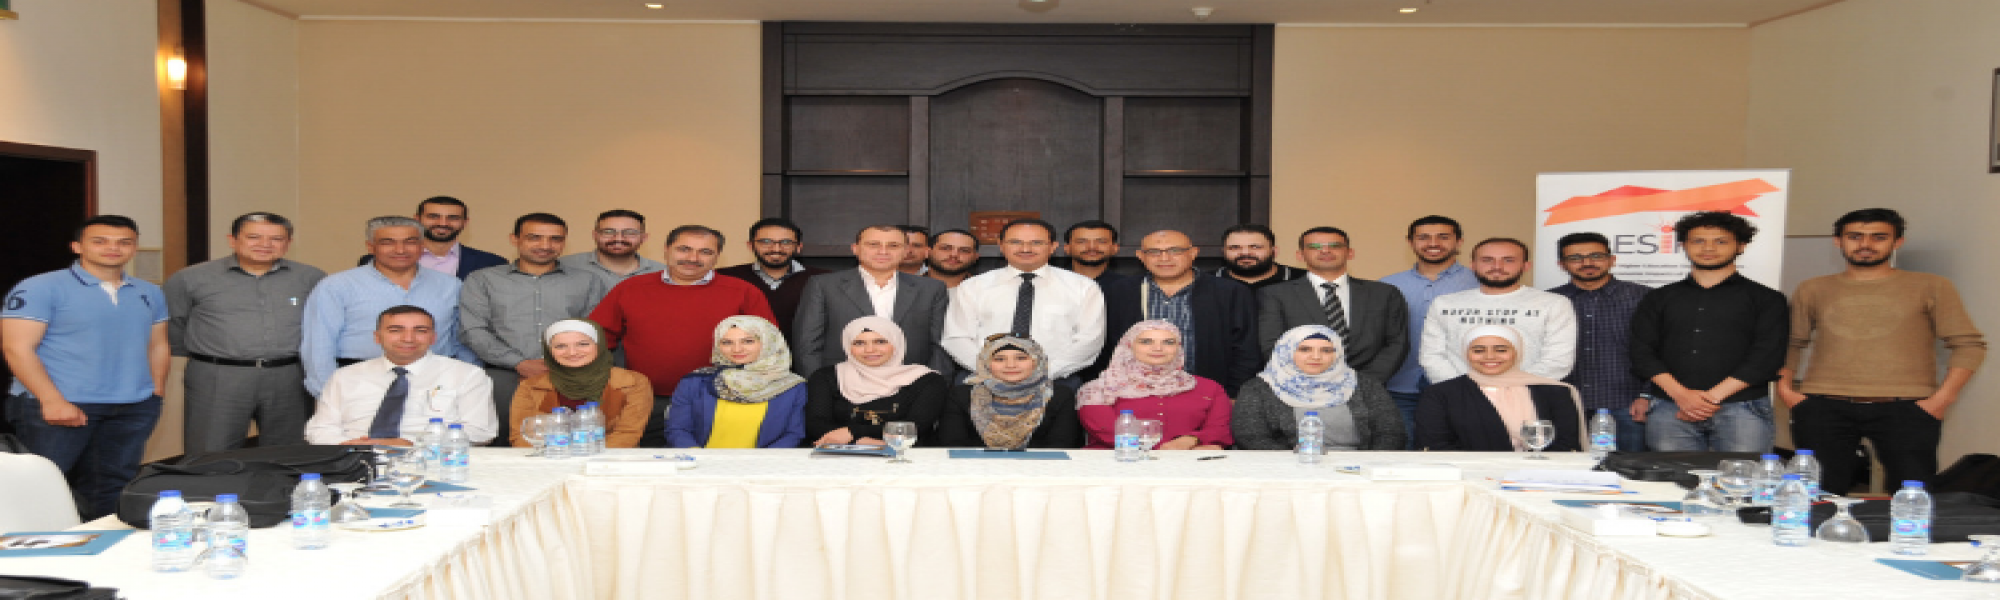 Dissemination Activity for Southern Universities in Aqaba, 28-30 March 2019